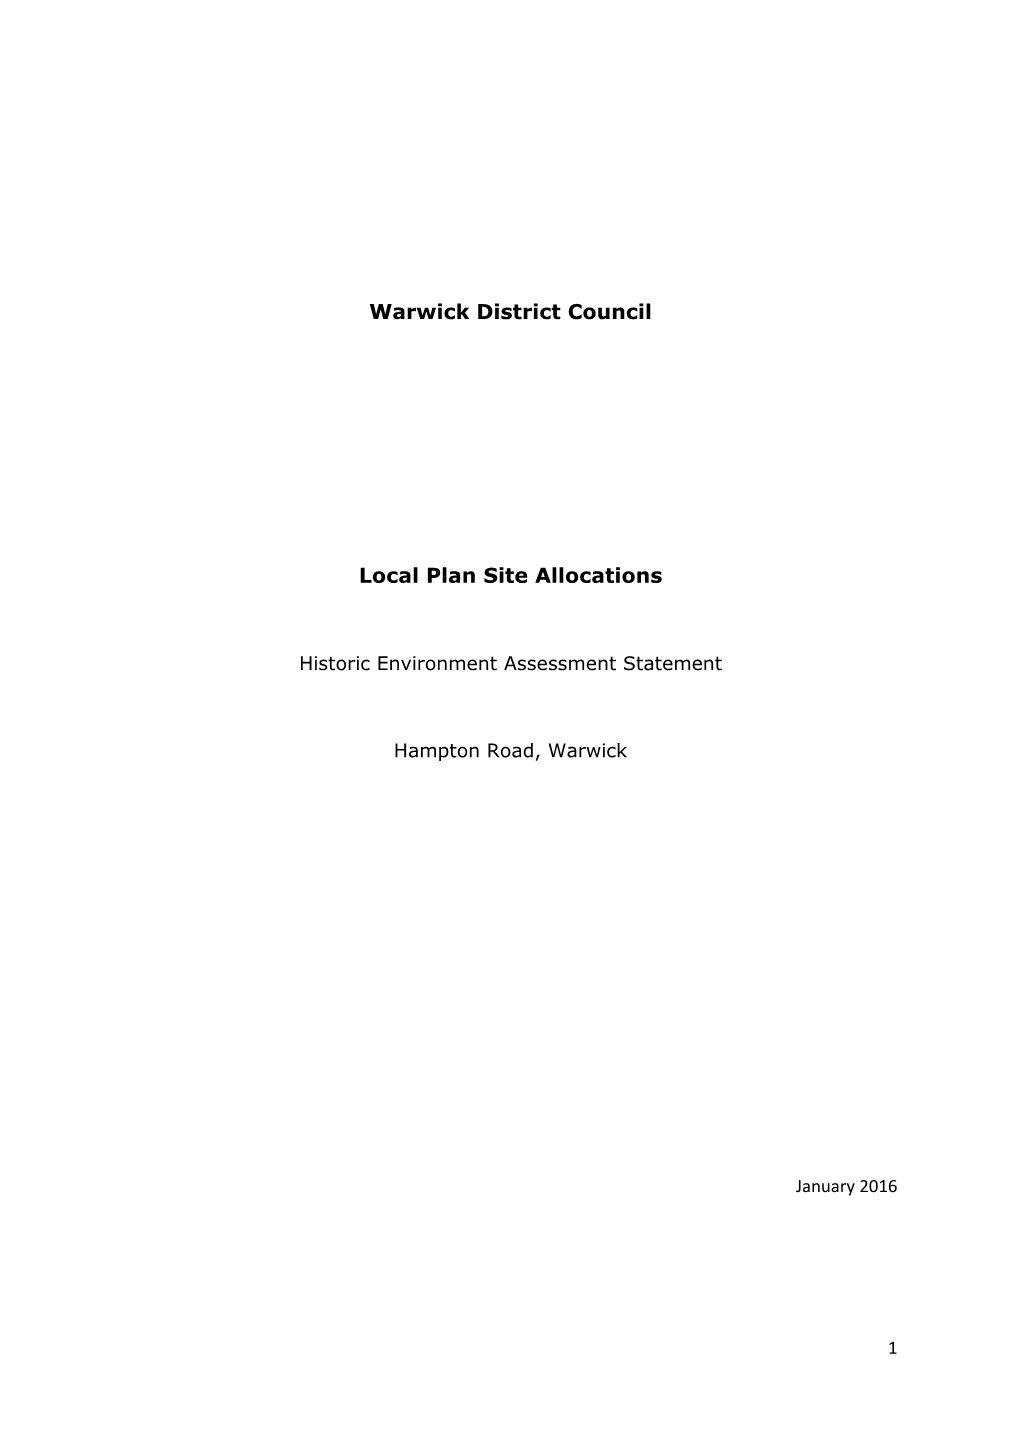 Warwick District Council Local Plan Site Allocations